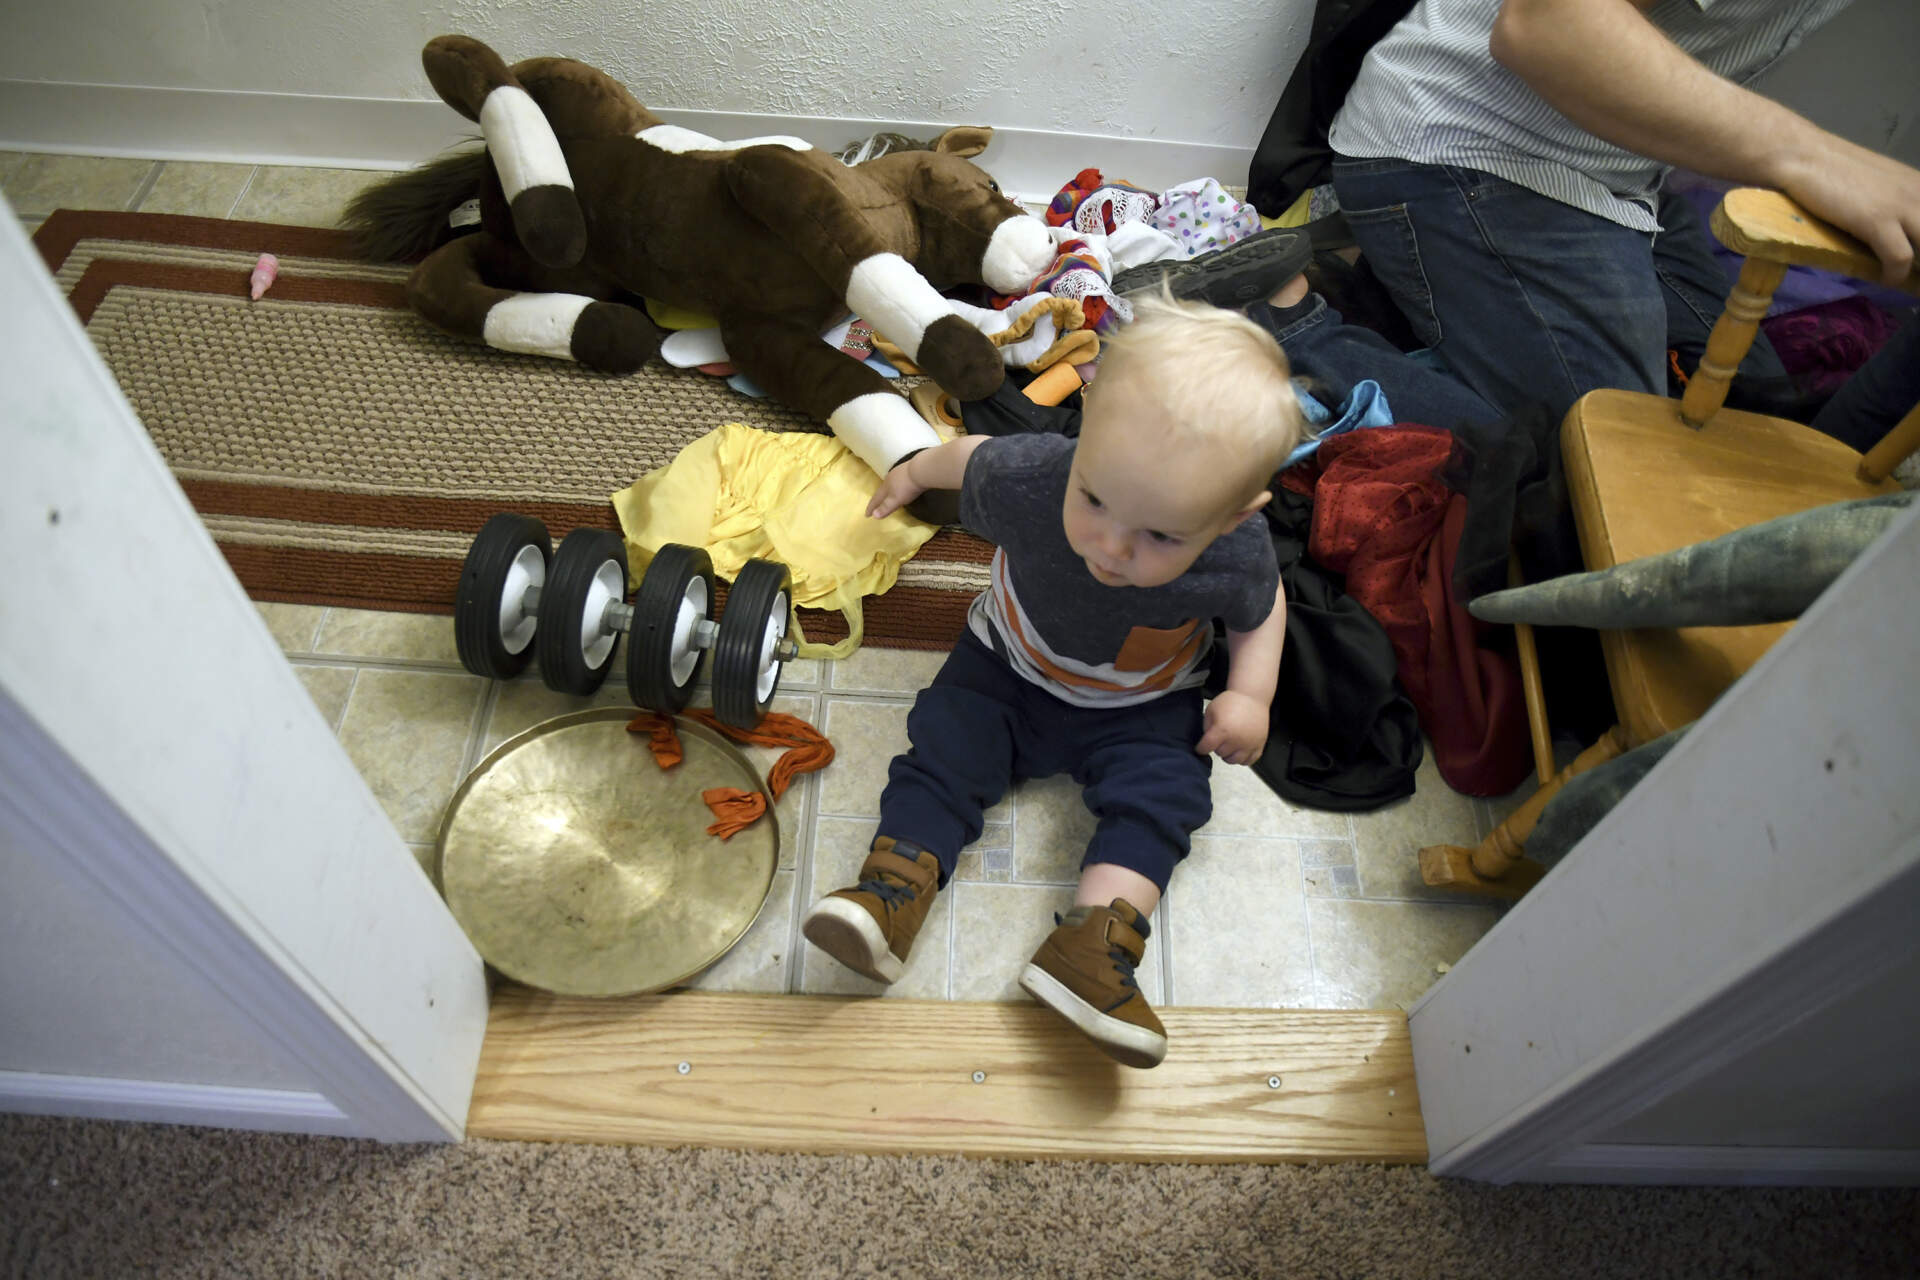 Cal Sabey, 1, plays at a relative's home in Centennial, Colo., Wednesday, May 3, 2023. (Thomas Peipert/AP)